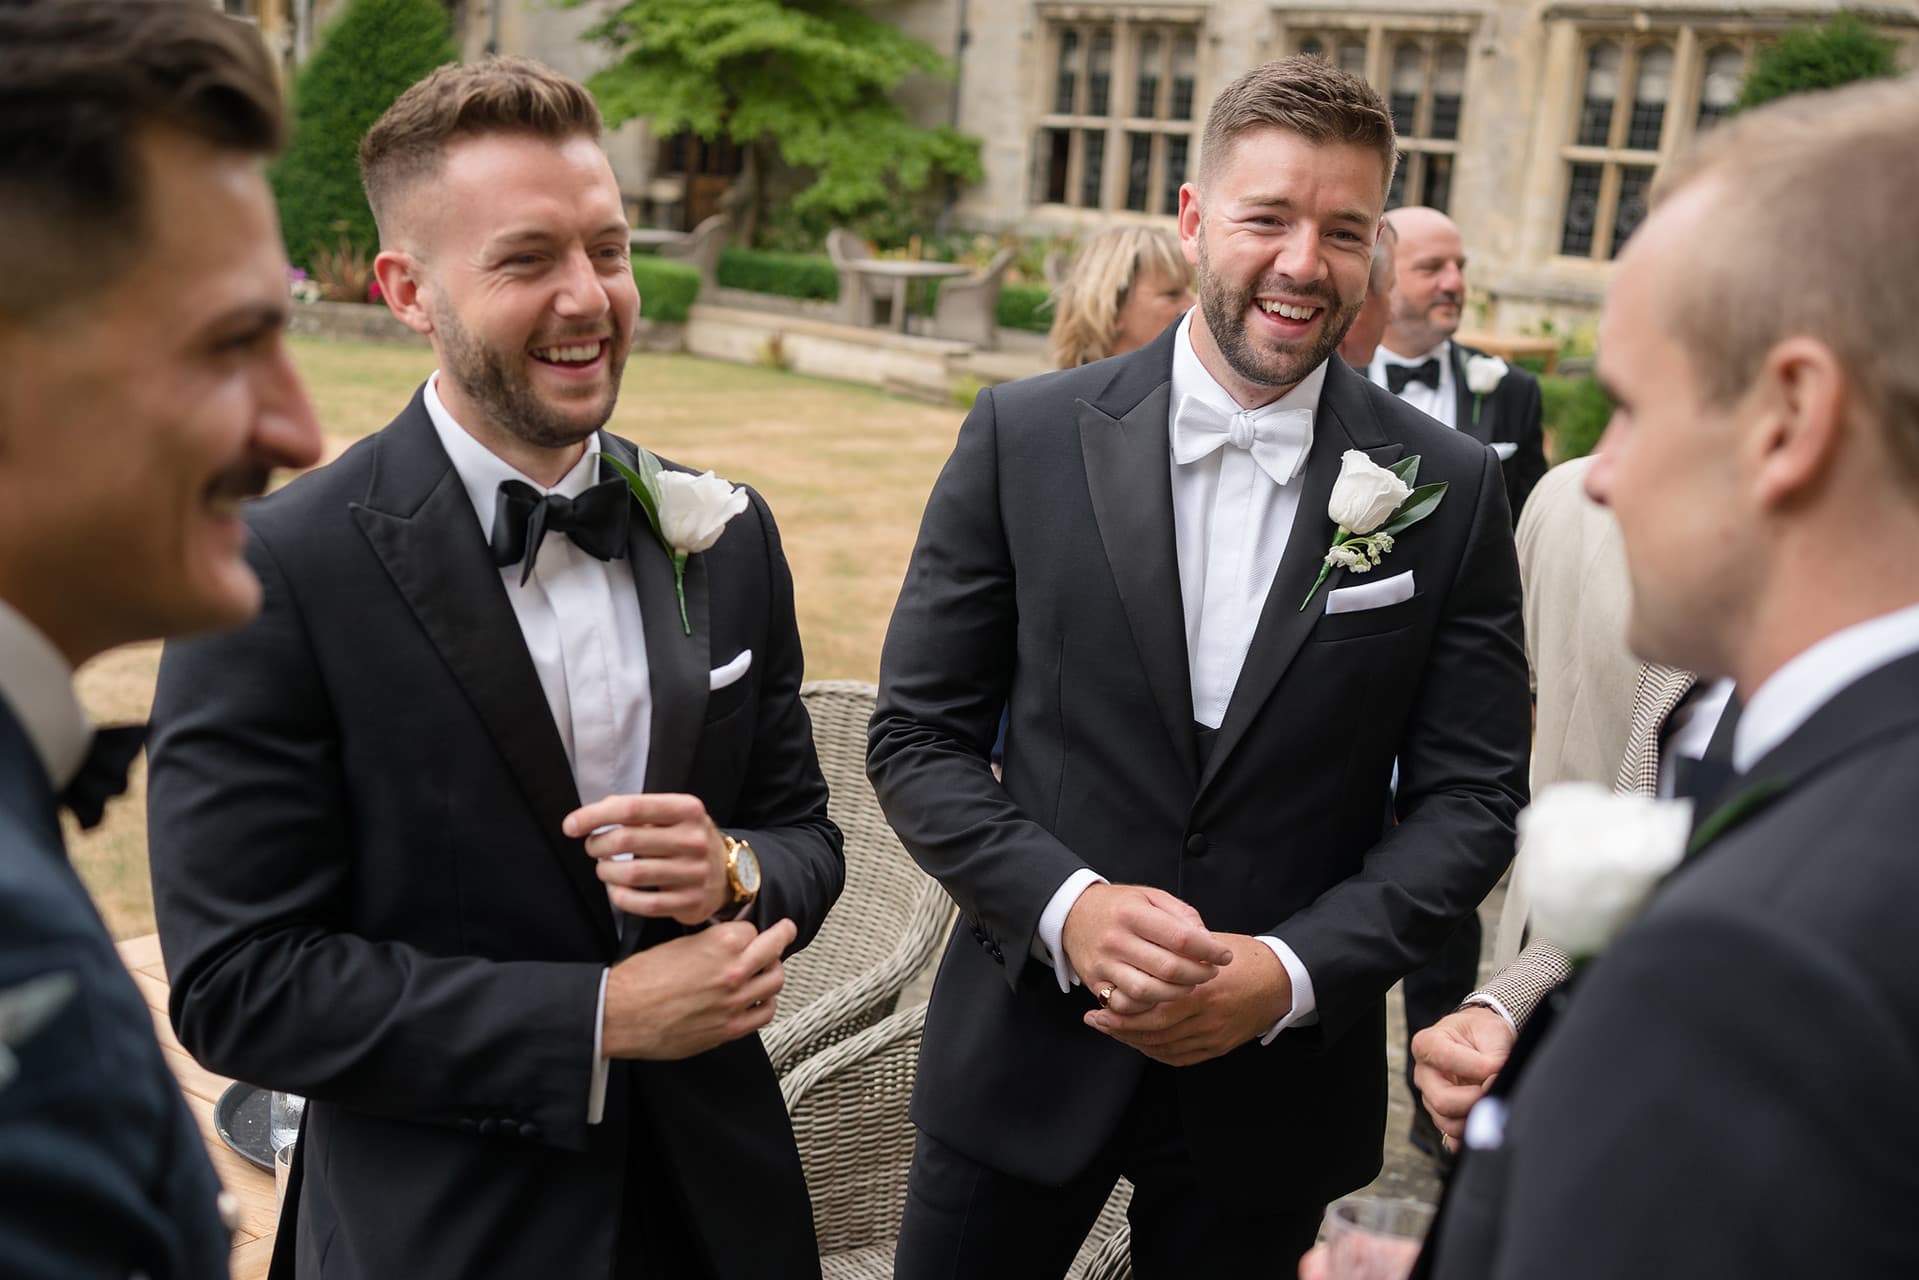 Groom and best man laughing with the ushers